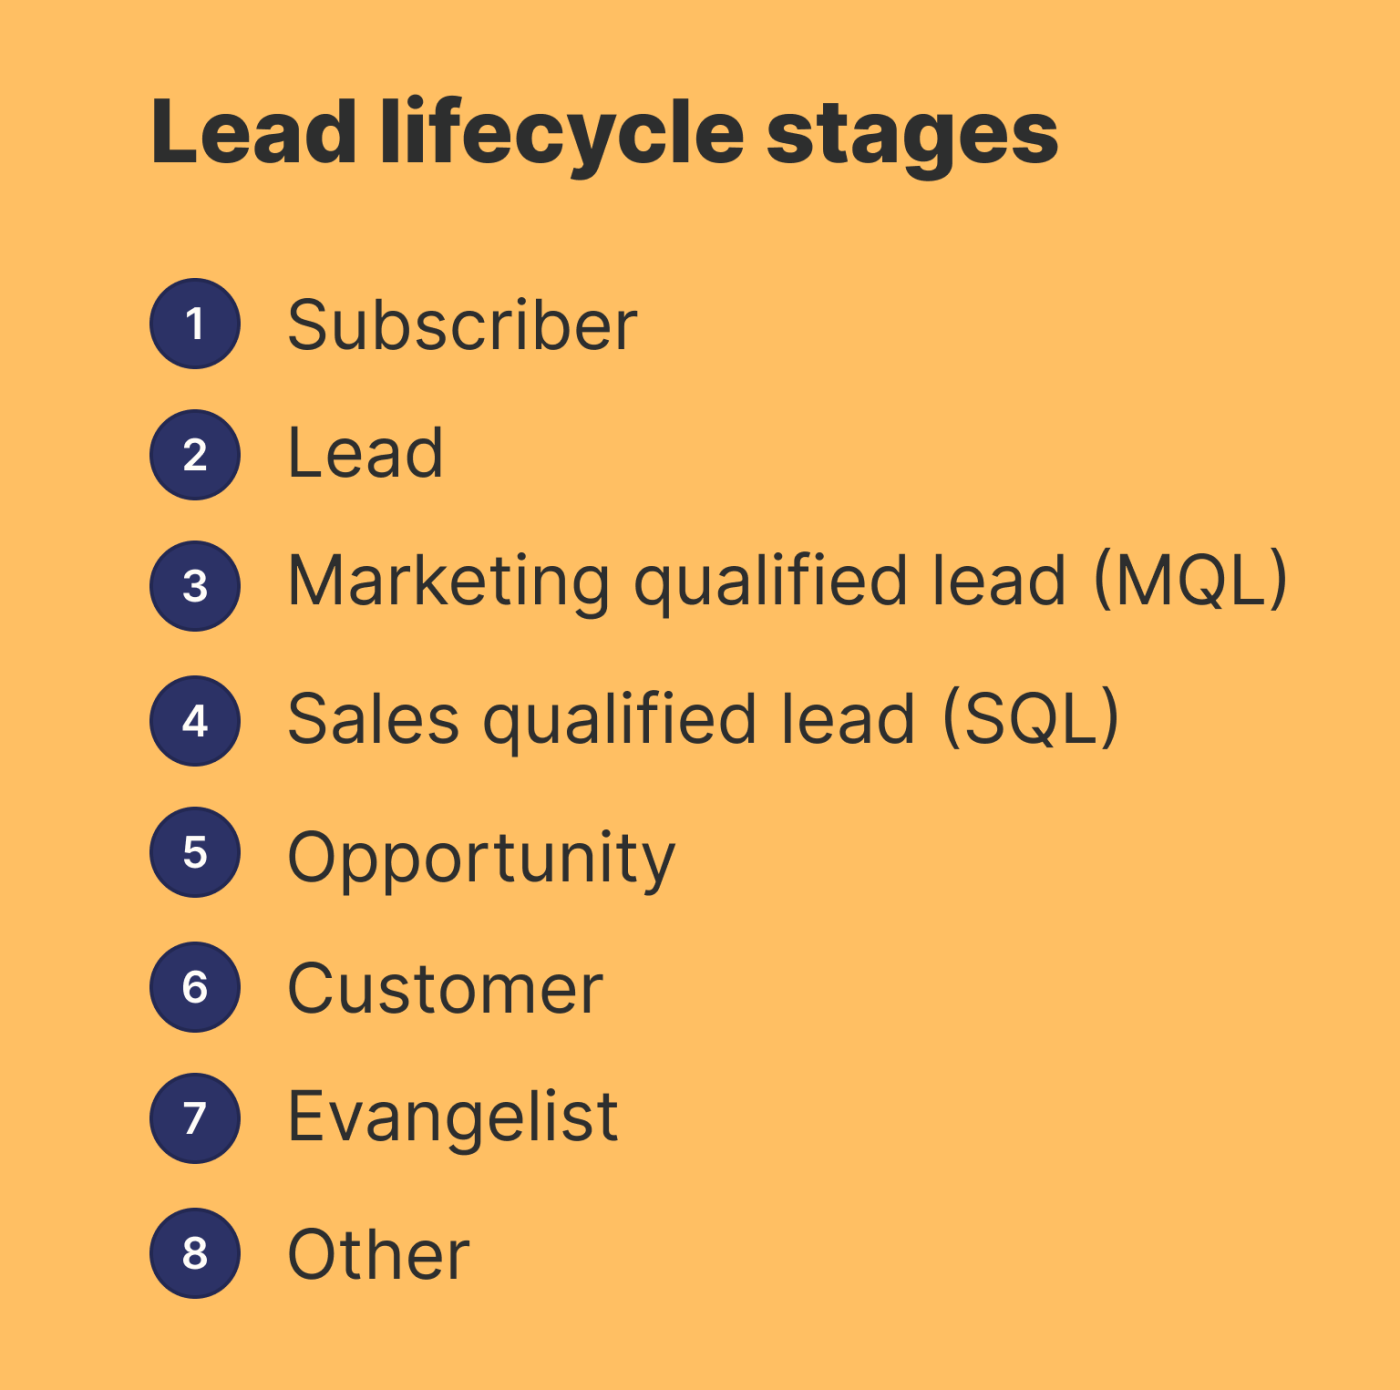 A list of the lead lifecycle stages